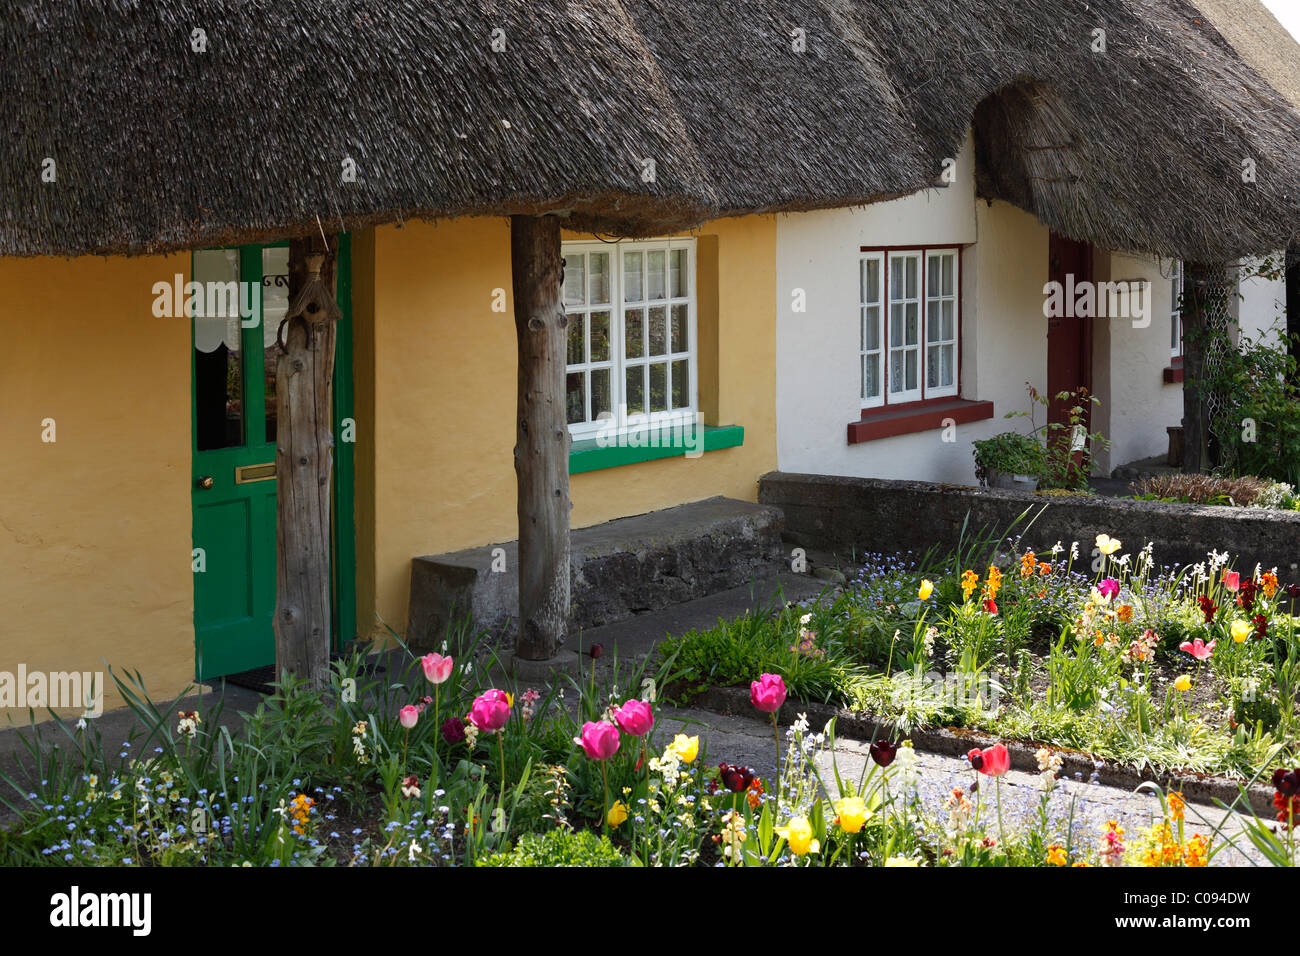 Houses with thatched roof, Adare, County Limerick, Ireland, British Isles, Europe Stock Photo